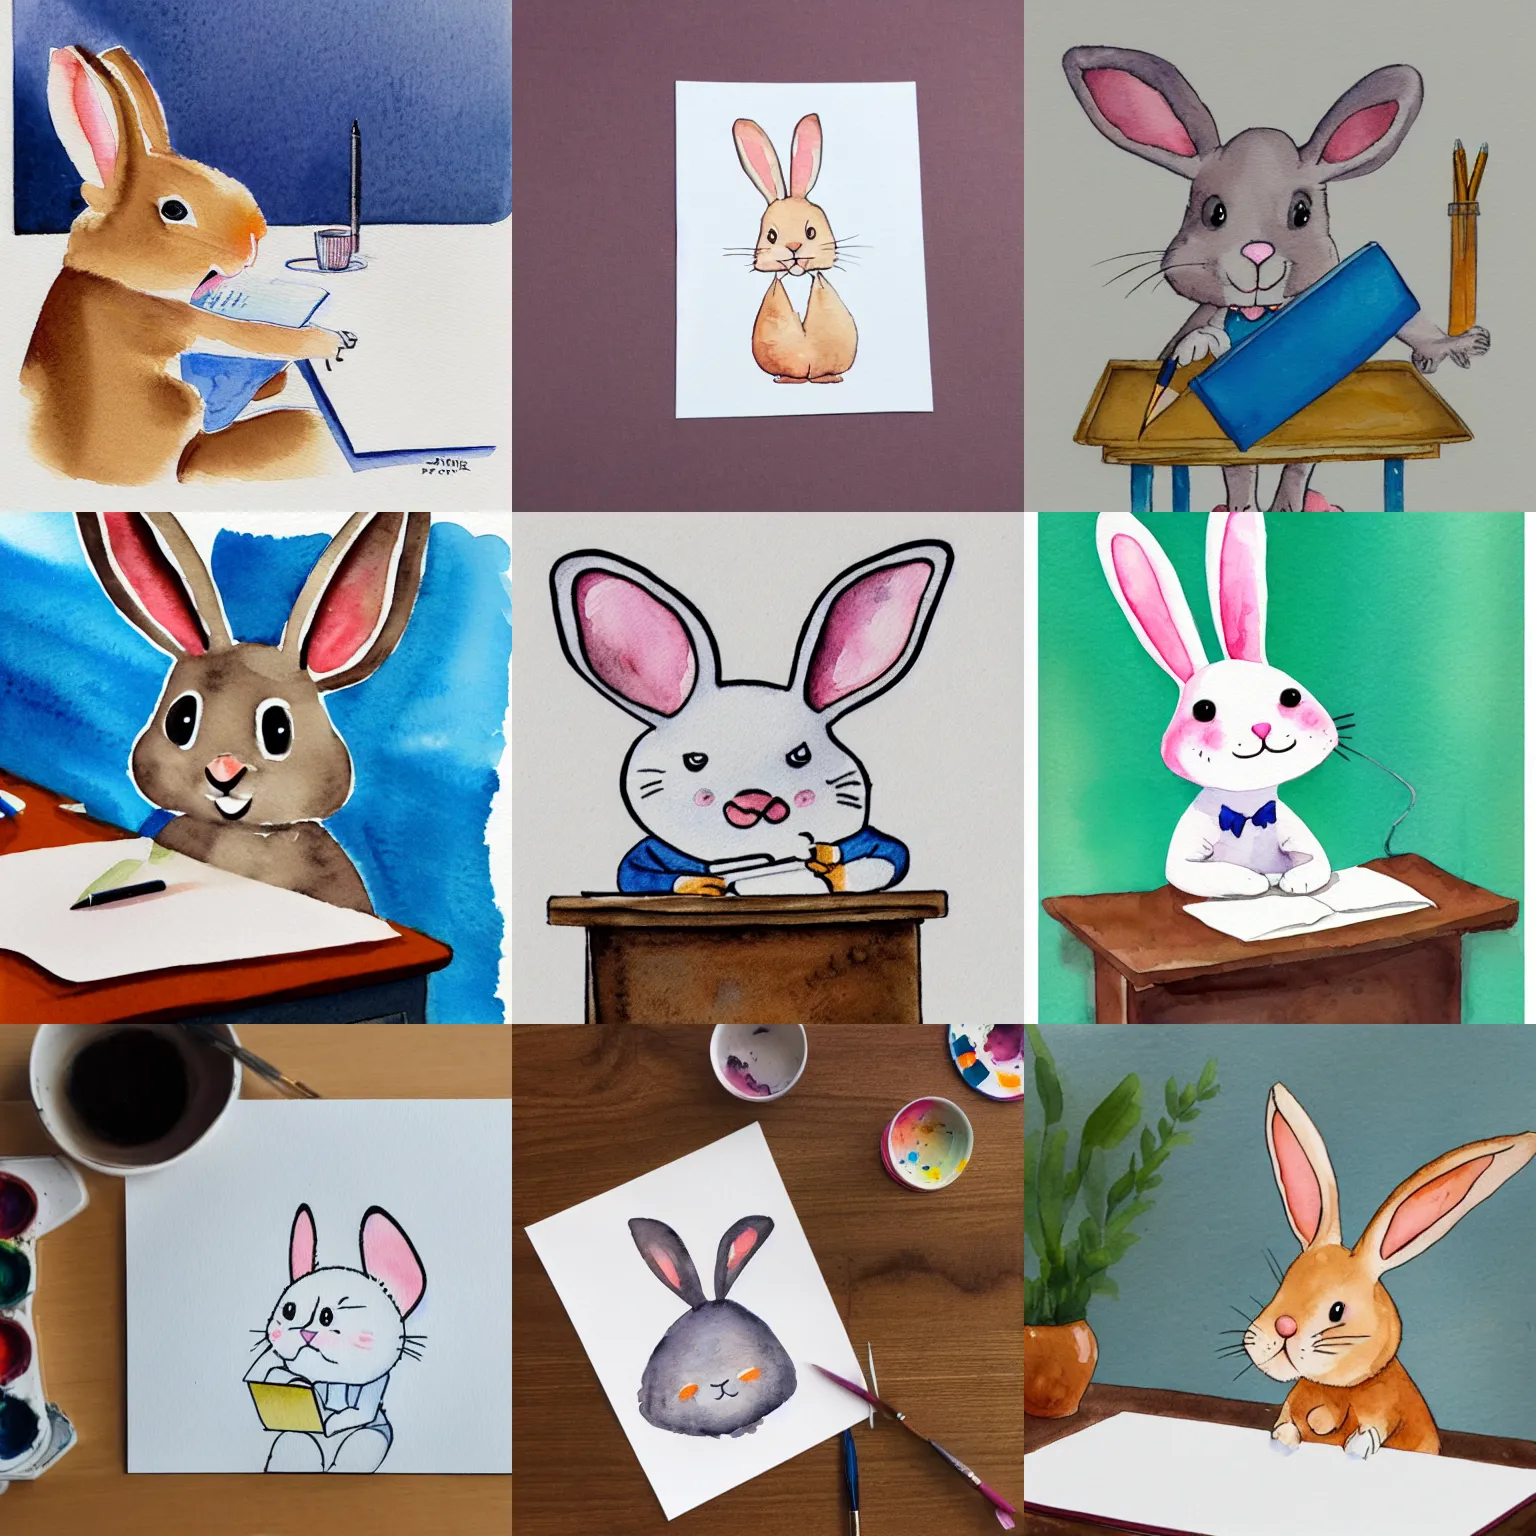 Prompt: a watercolor painting of a cute happy cartoon rabbit sitting at a desk writing on a paper